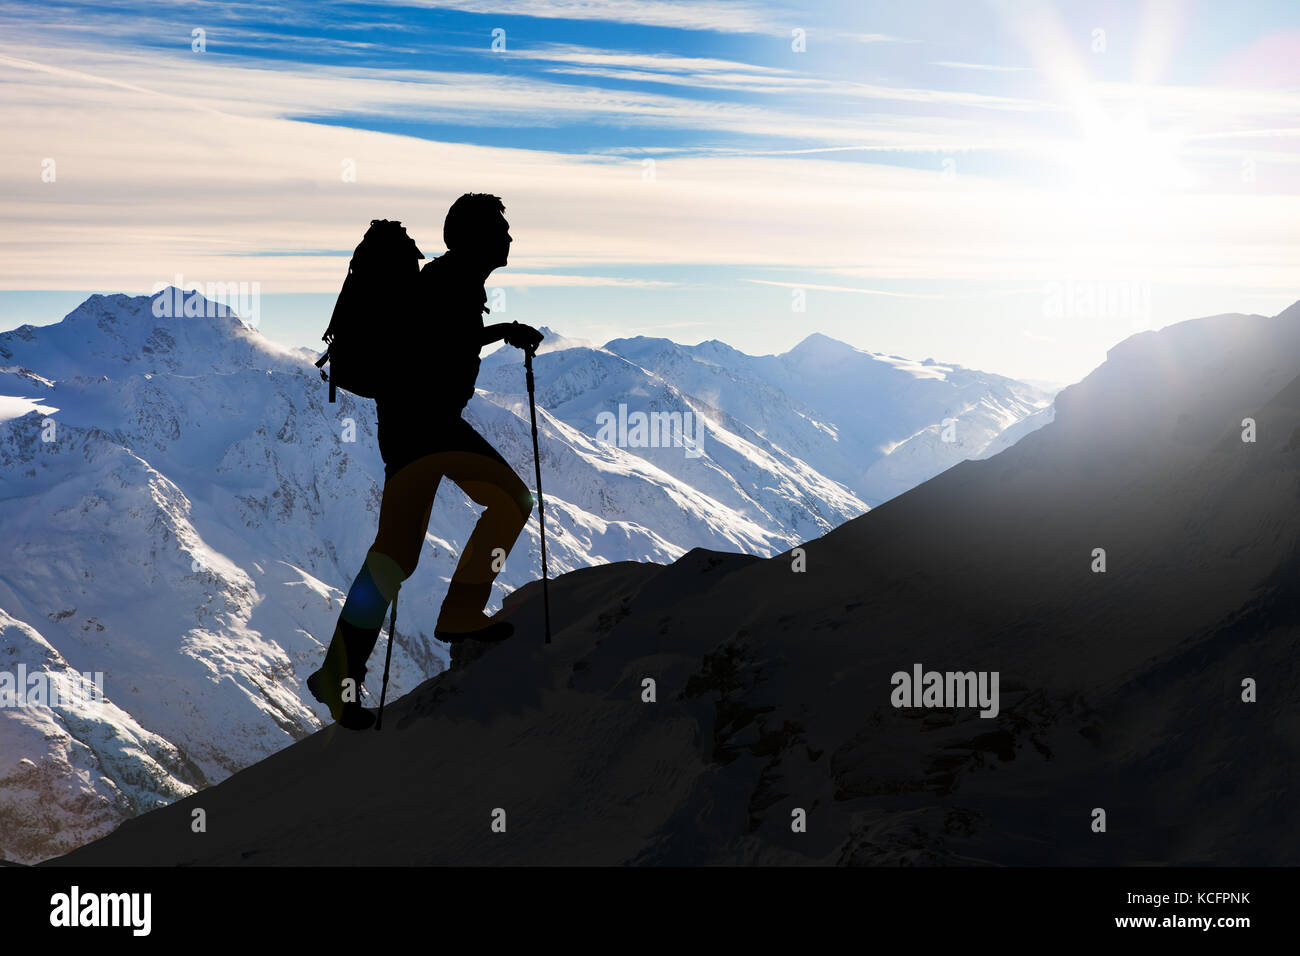 Silhouette Of A Man With Backpack And Hiking On A Mountain Stock Photo